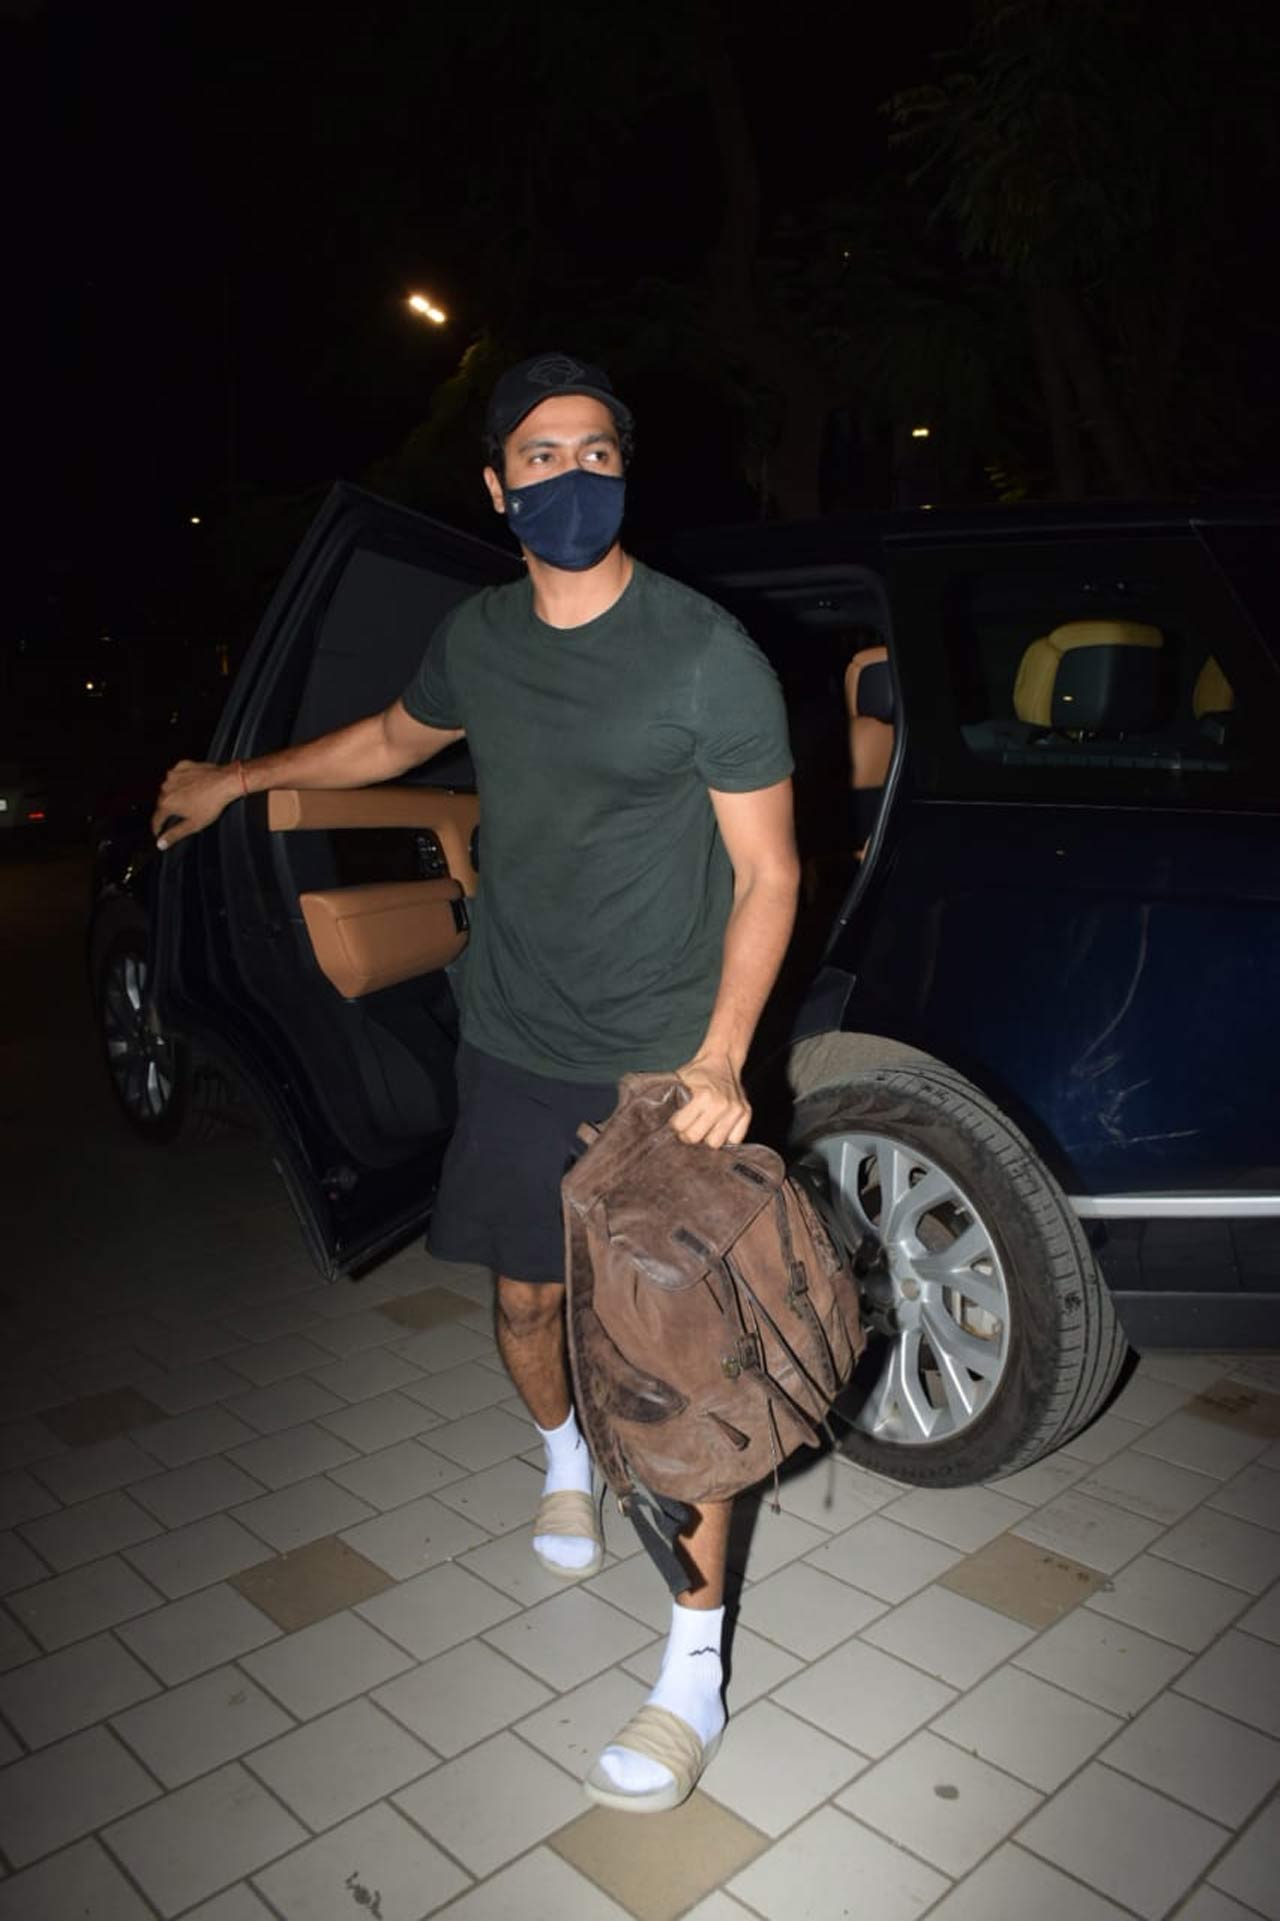 Vicky Kaushal and Katrina Kaif were snapped at the gym over the weekend. The two are fitness enthusiasts, and were seen sweating it out before their pre-wedding festivities.